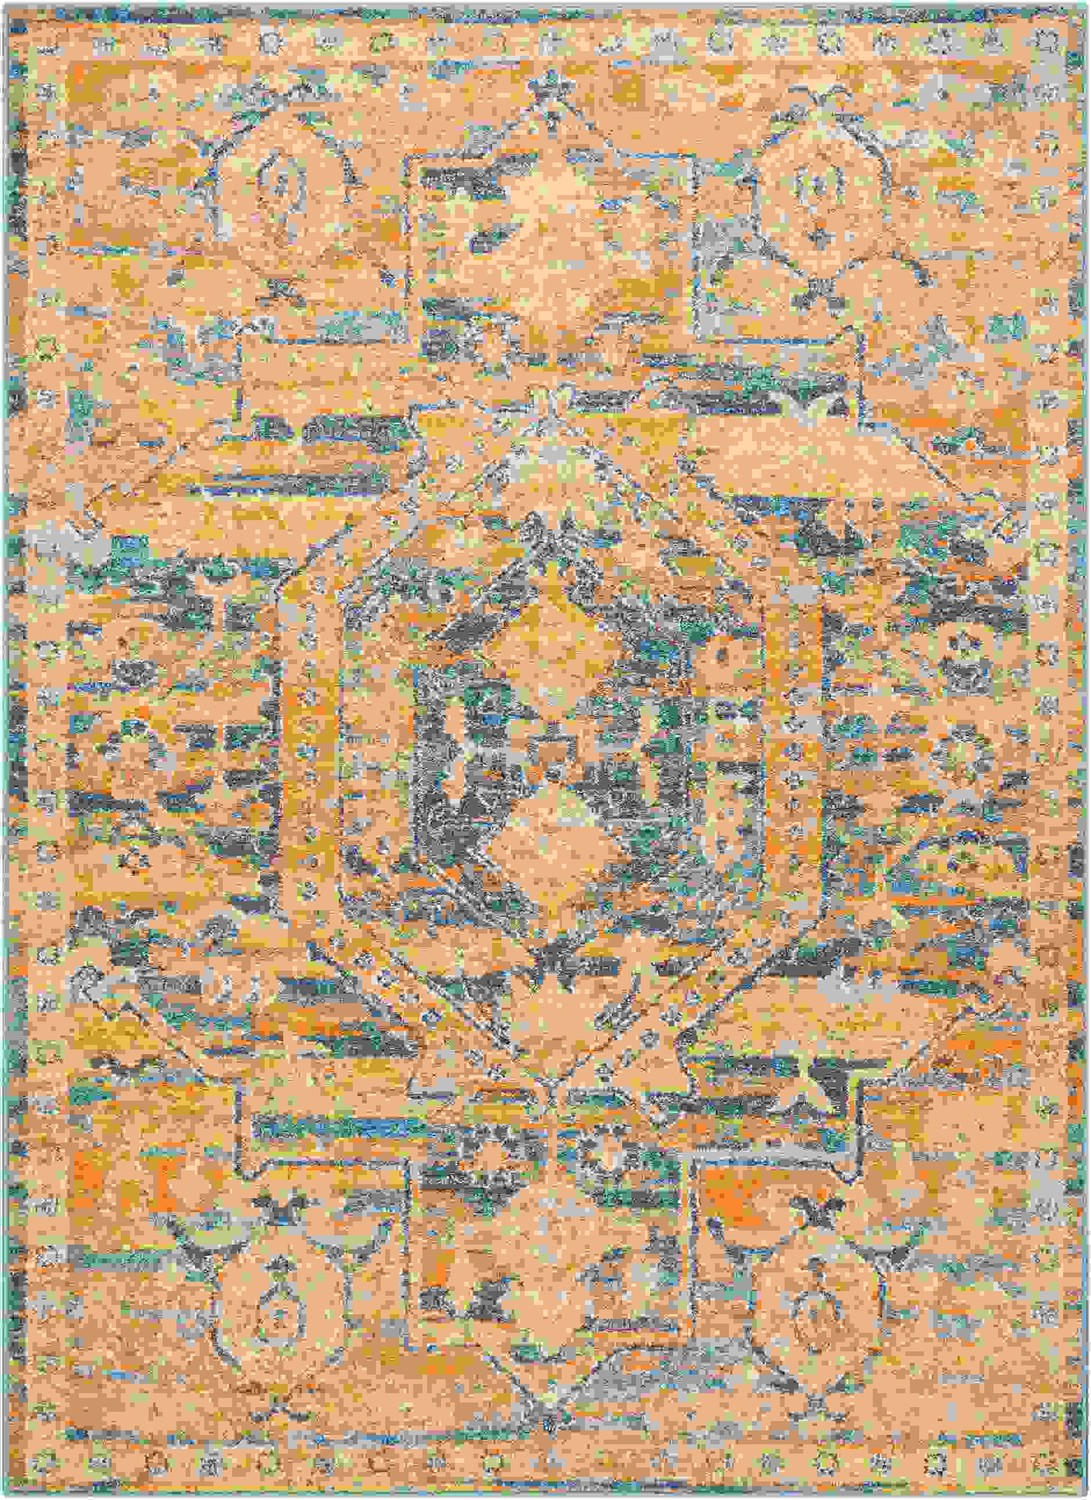 5 x 7 Gold and Blue Antique Area Rug